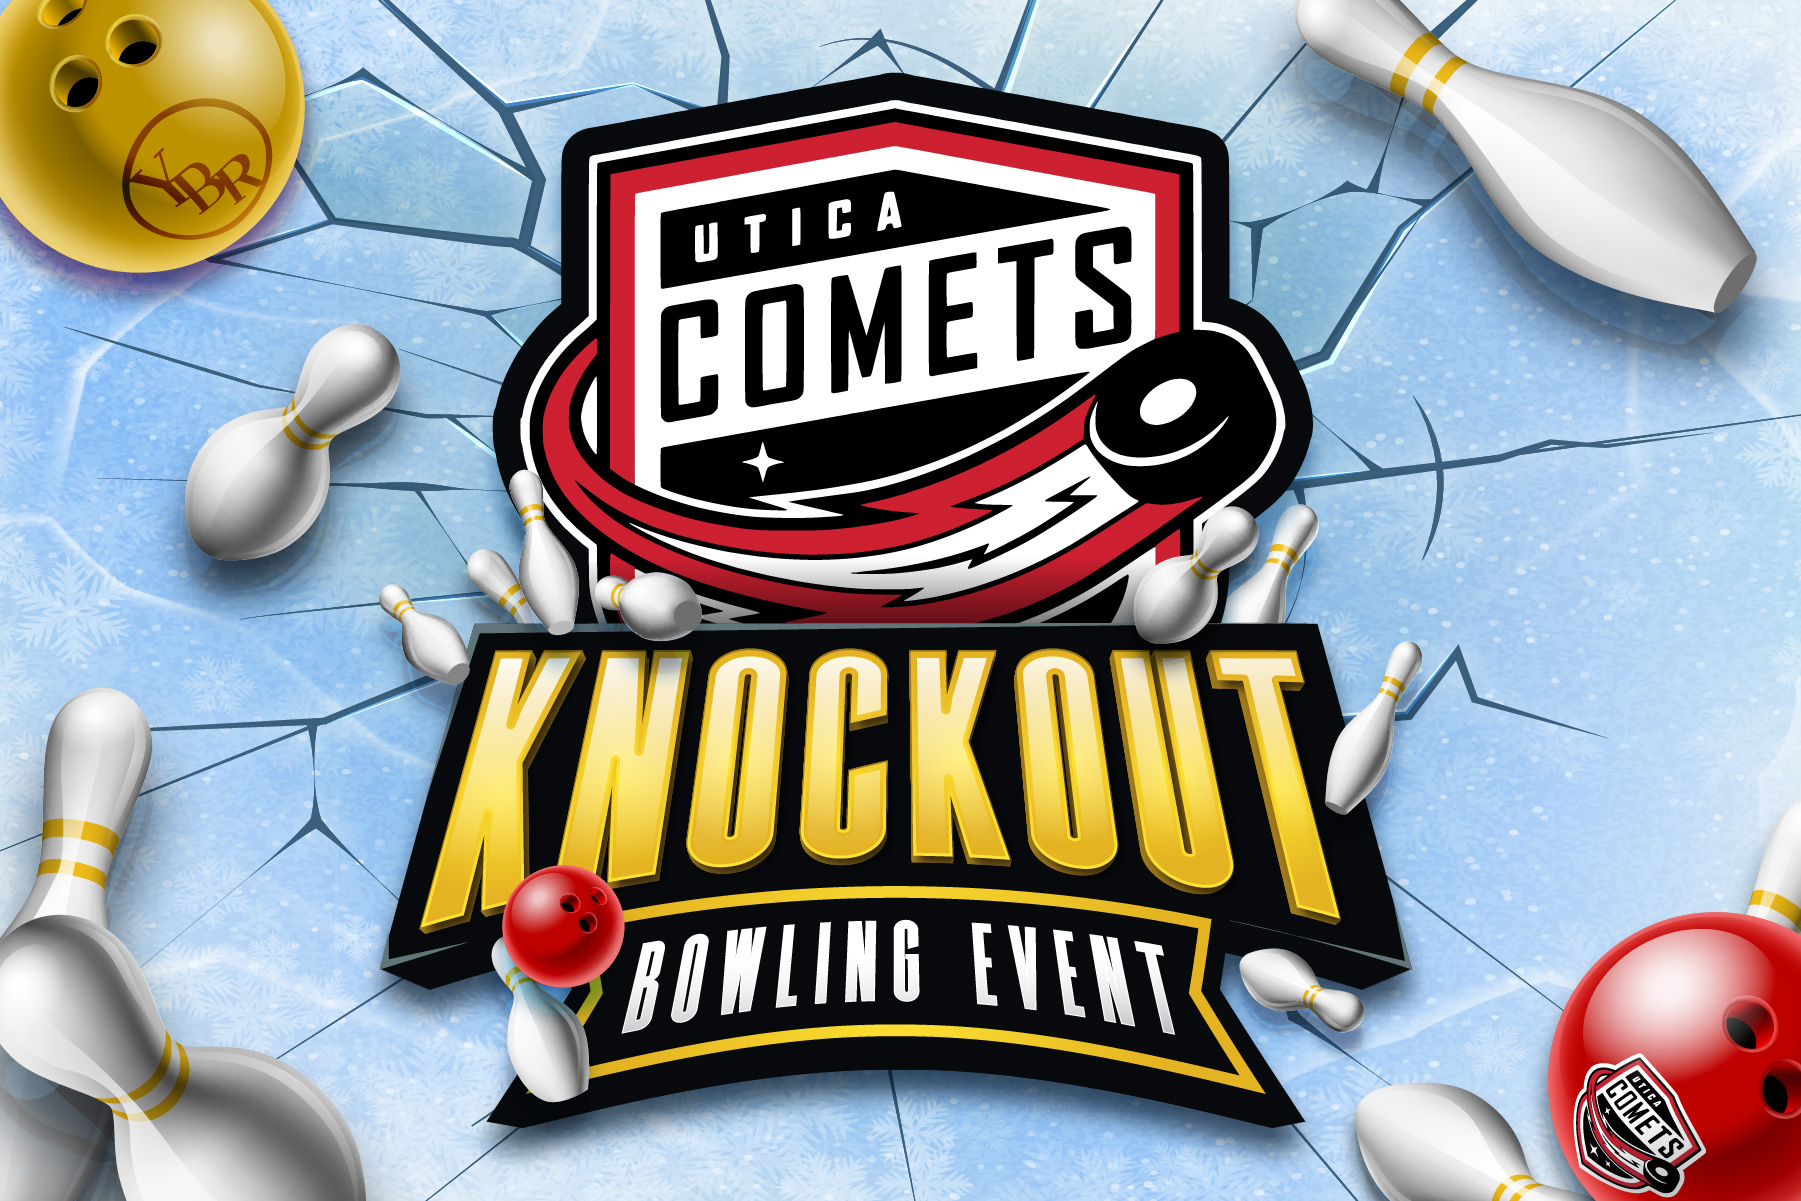 Utica Comets Knockout Bowling Event